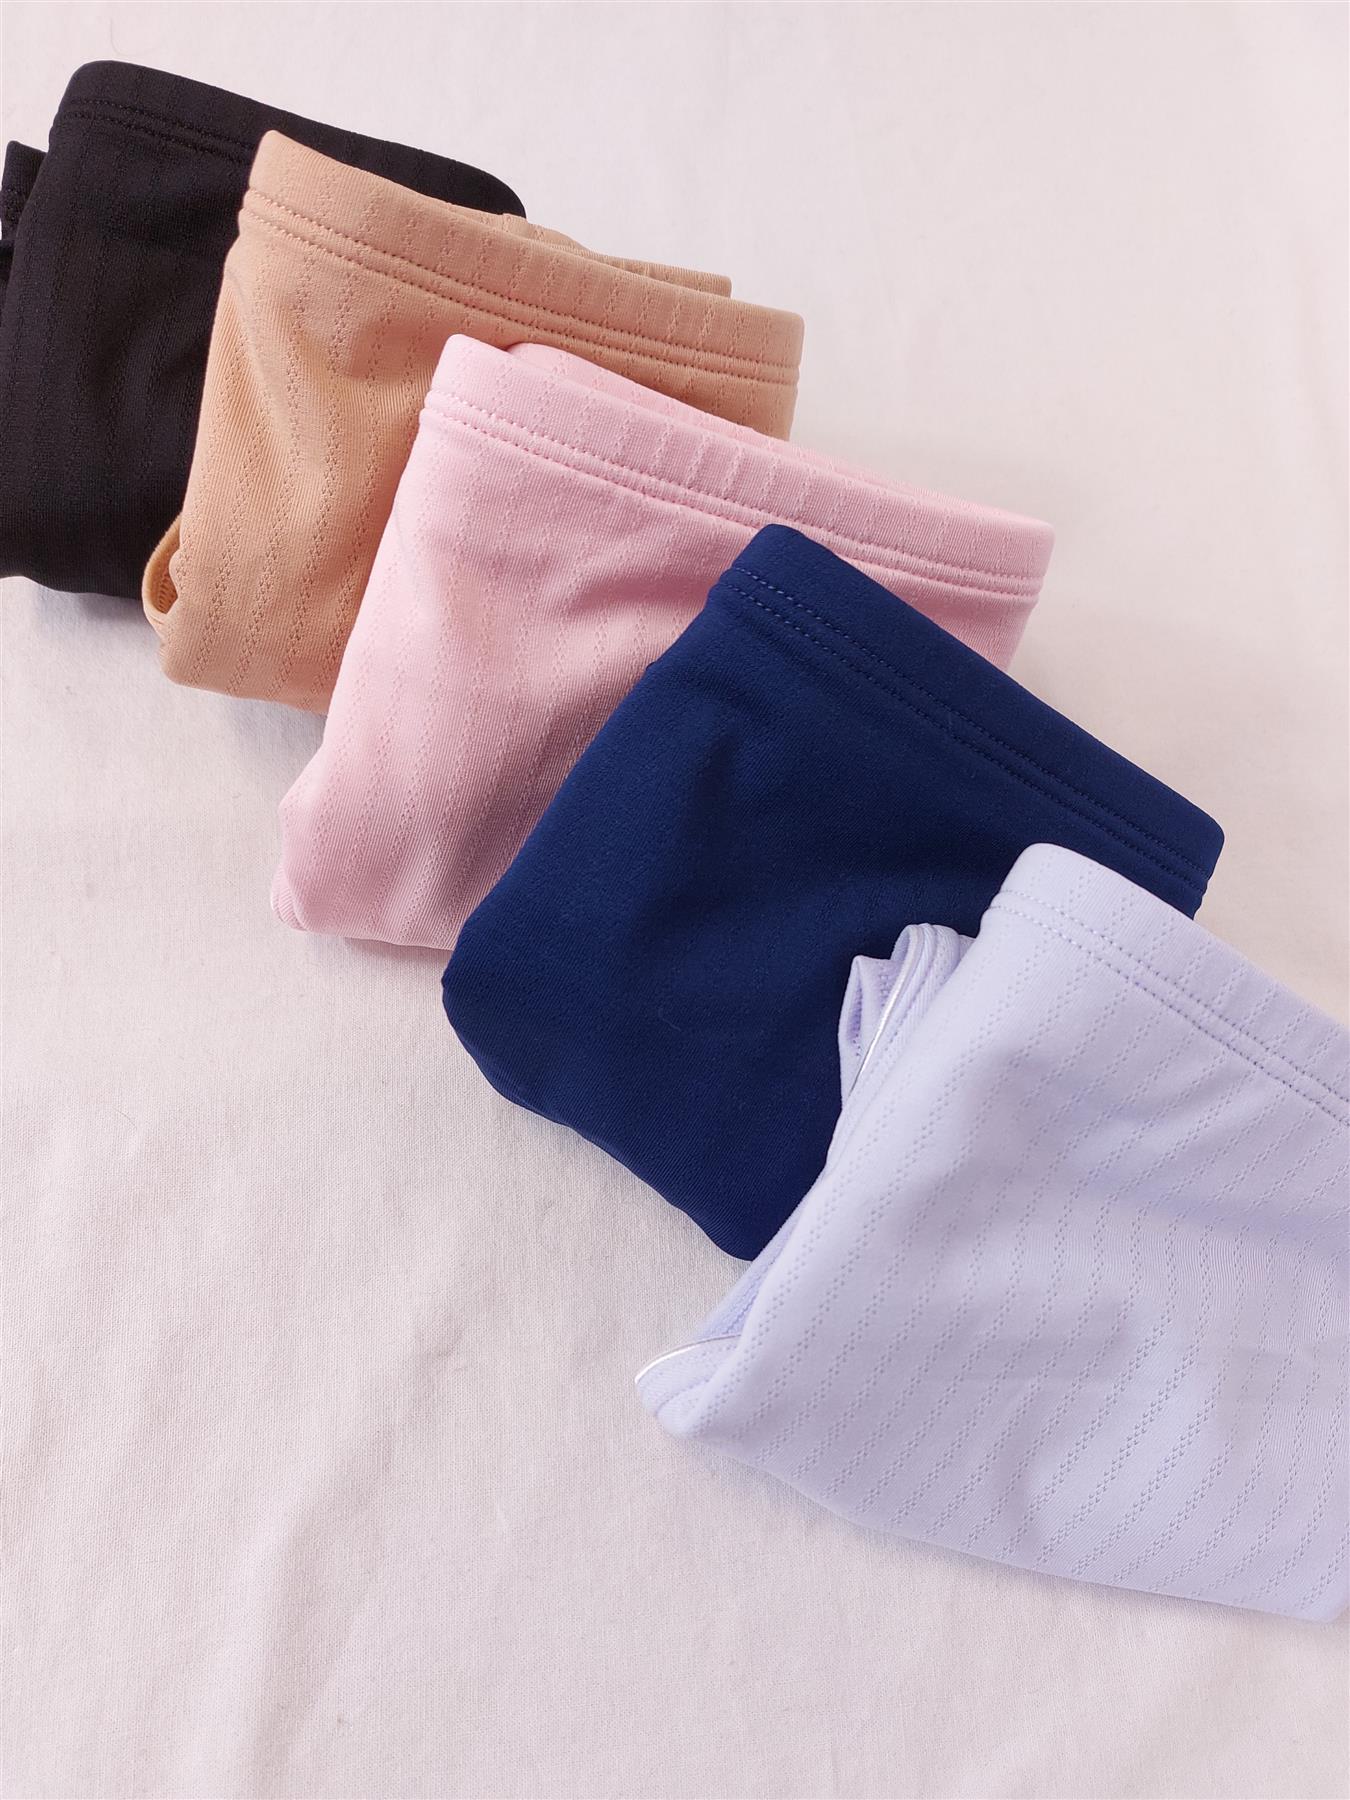 5-Pack Jockey Women's Knickers High Leg Assorted Cotton Lined Multipack